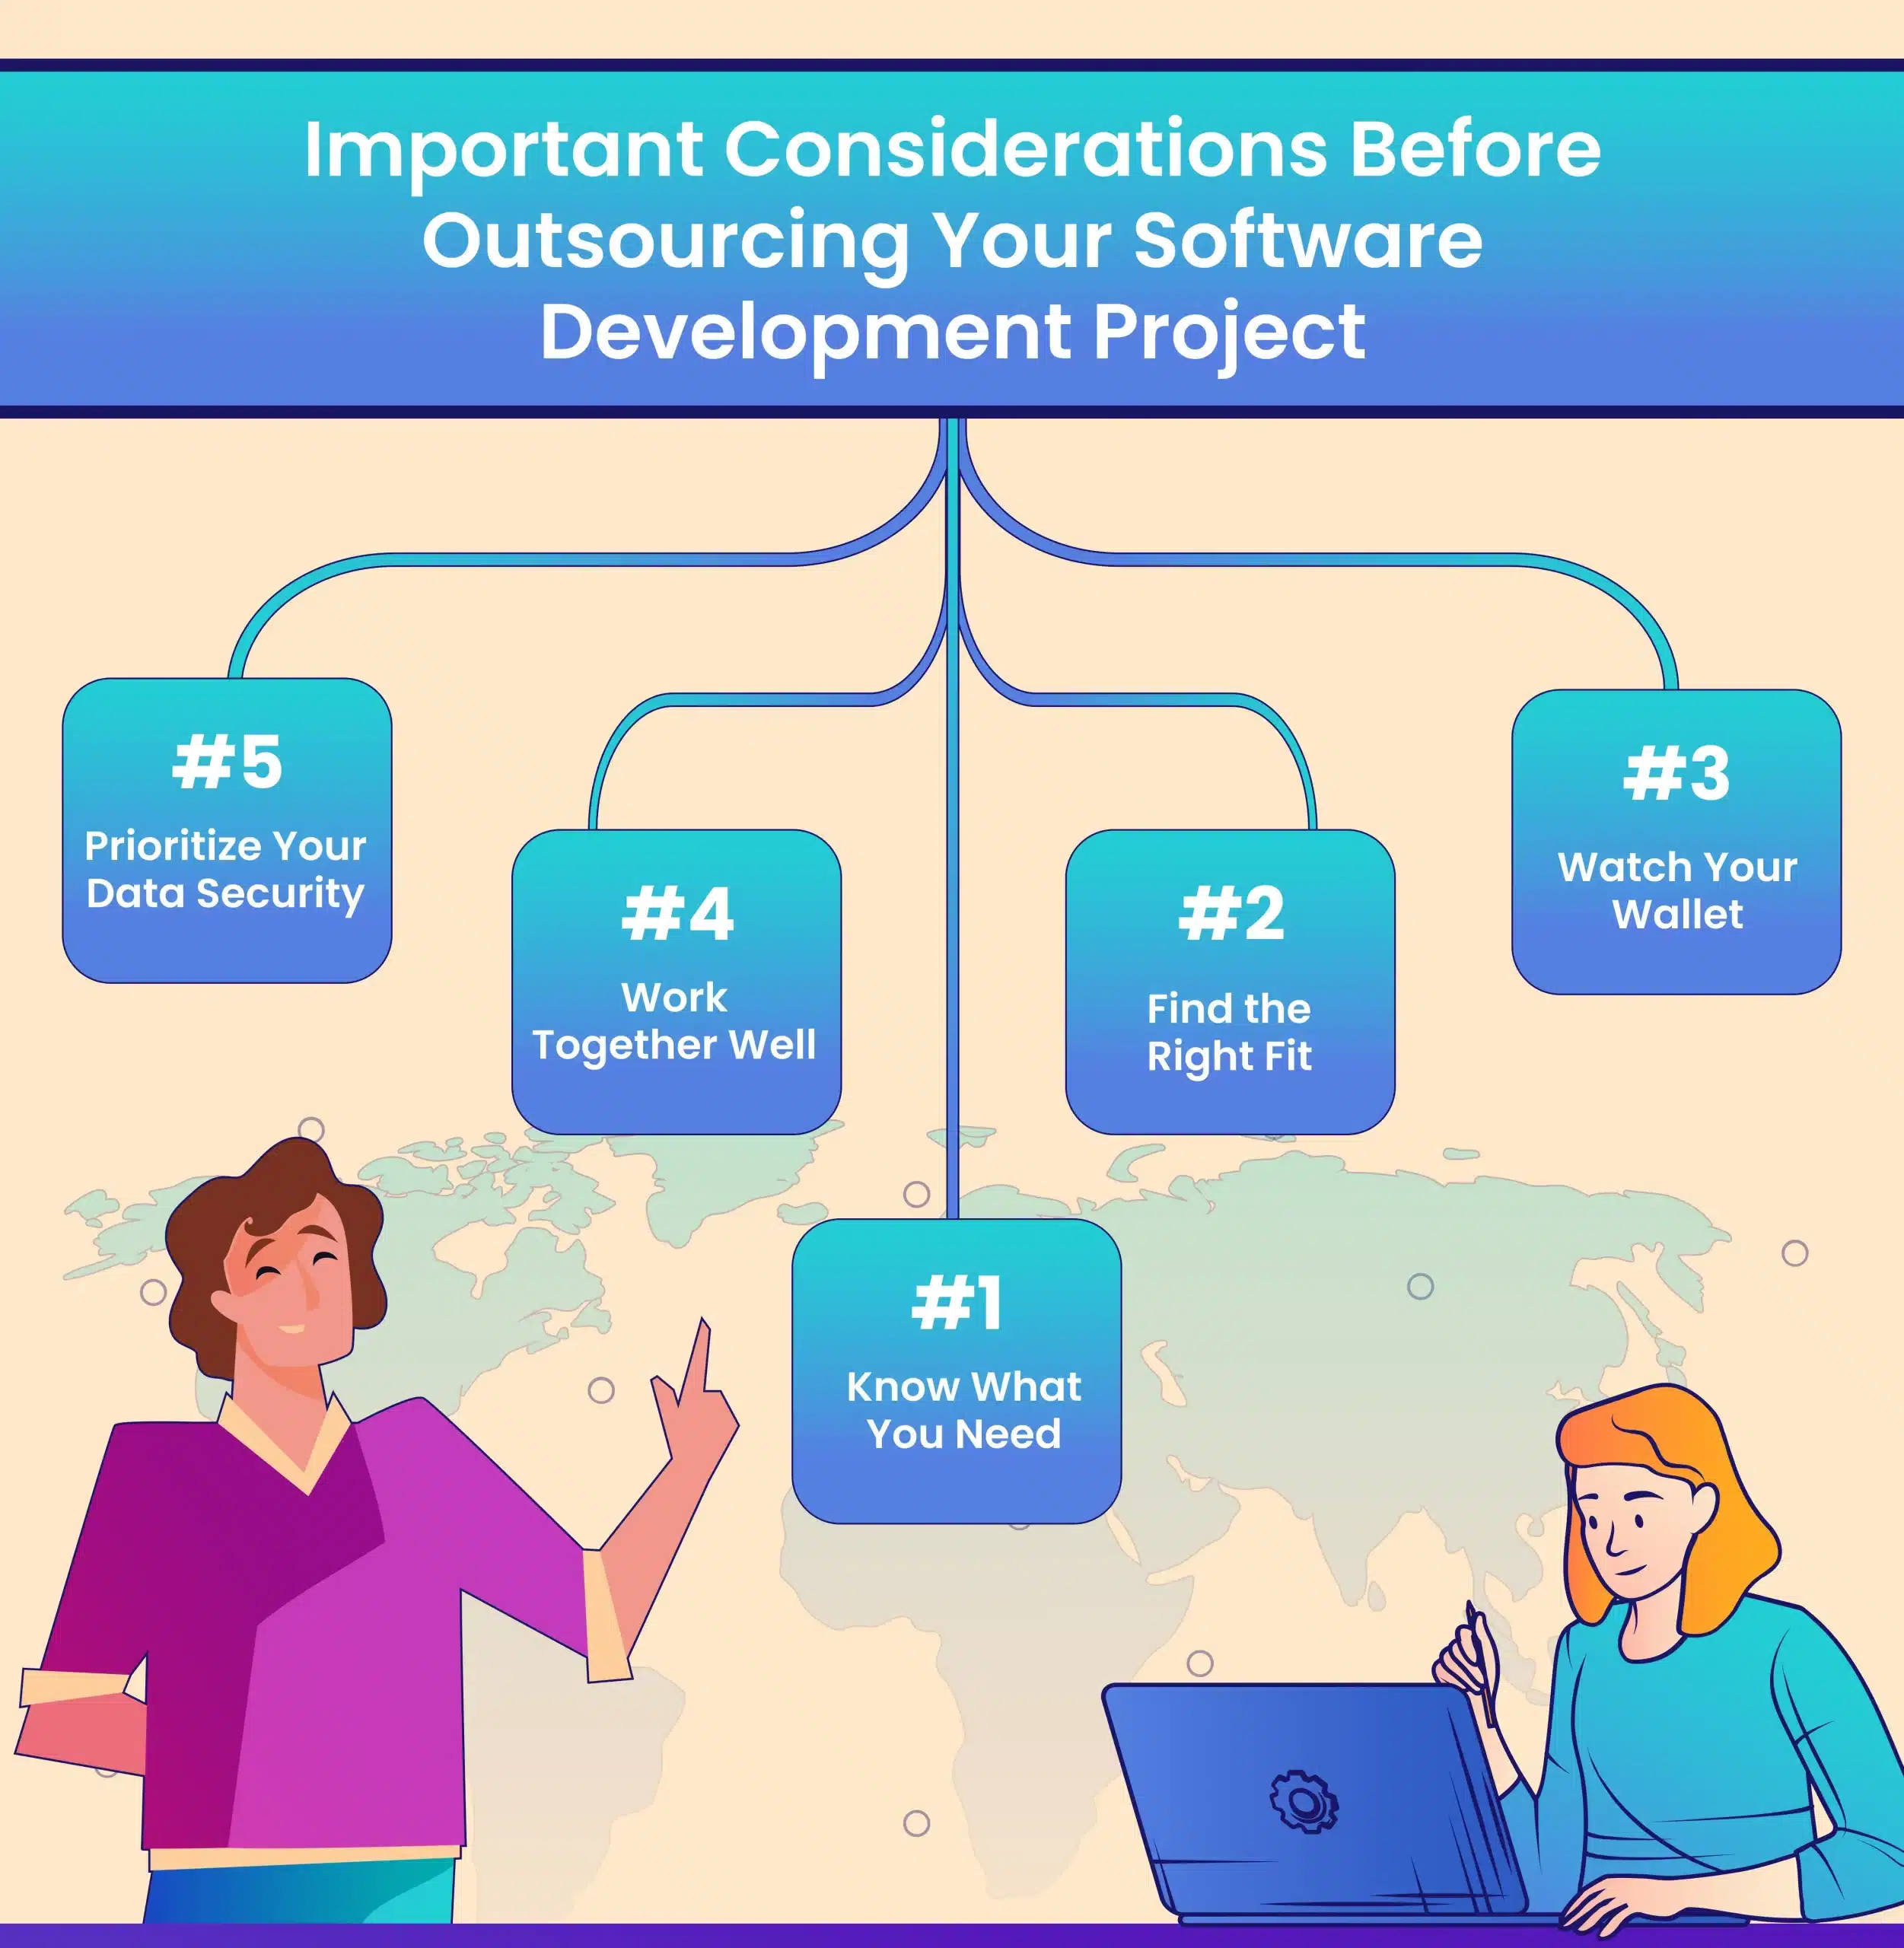 Outsourcing Your Software Development Project